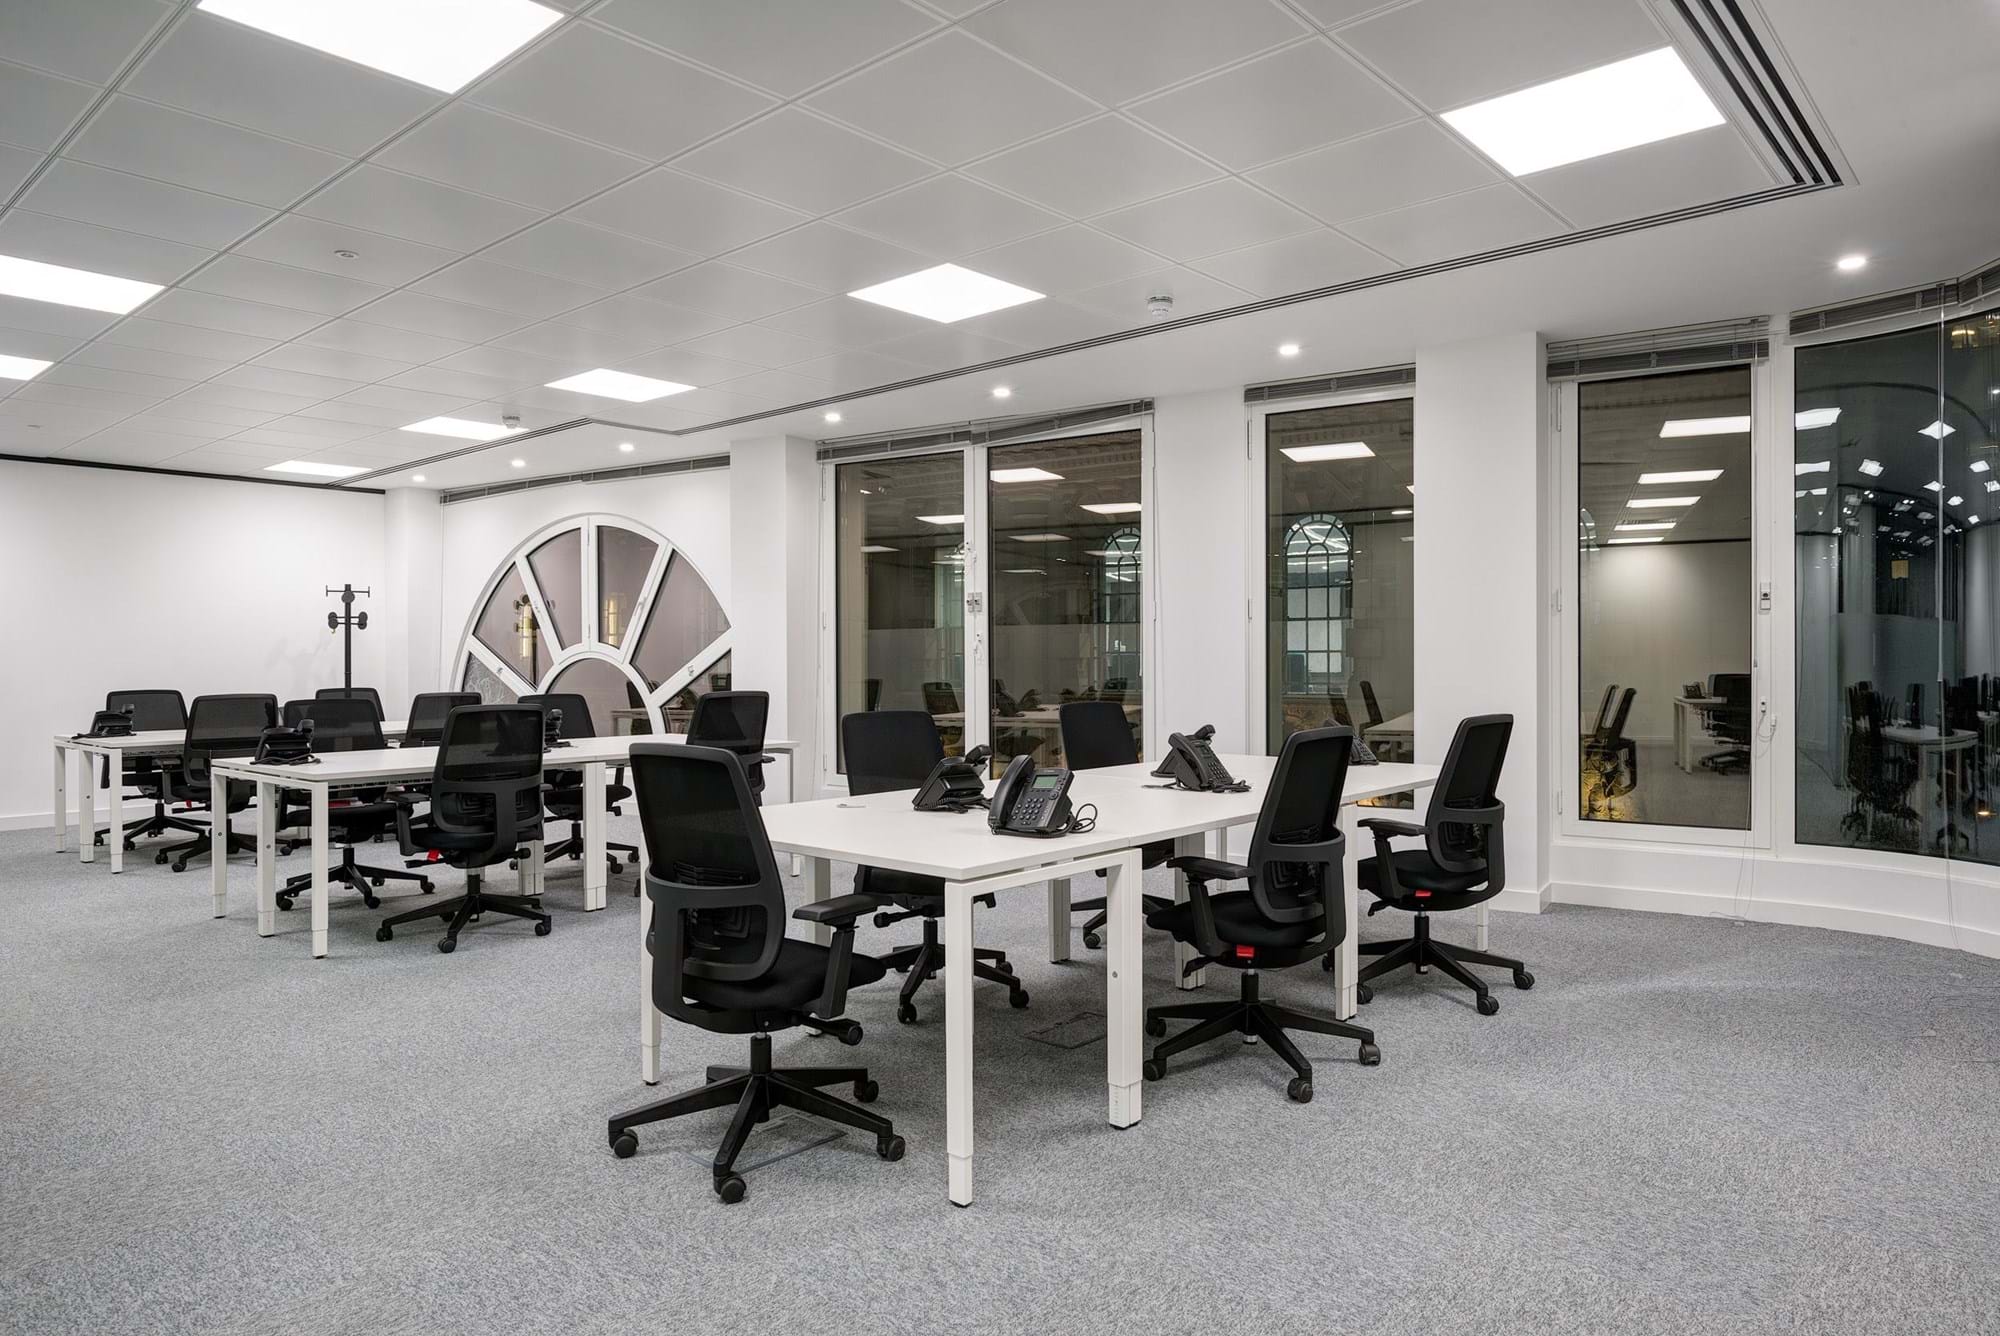 Modus Workspace office design, fit out and refurbishment - Spaces - Moorgate, London - Spaces Moorgate 13 highres sRGB.jpg